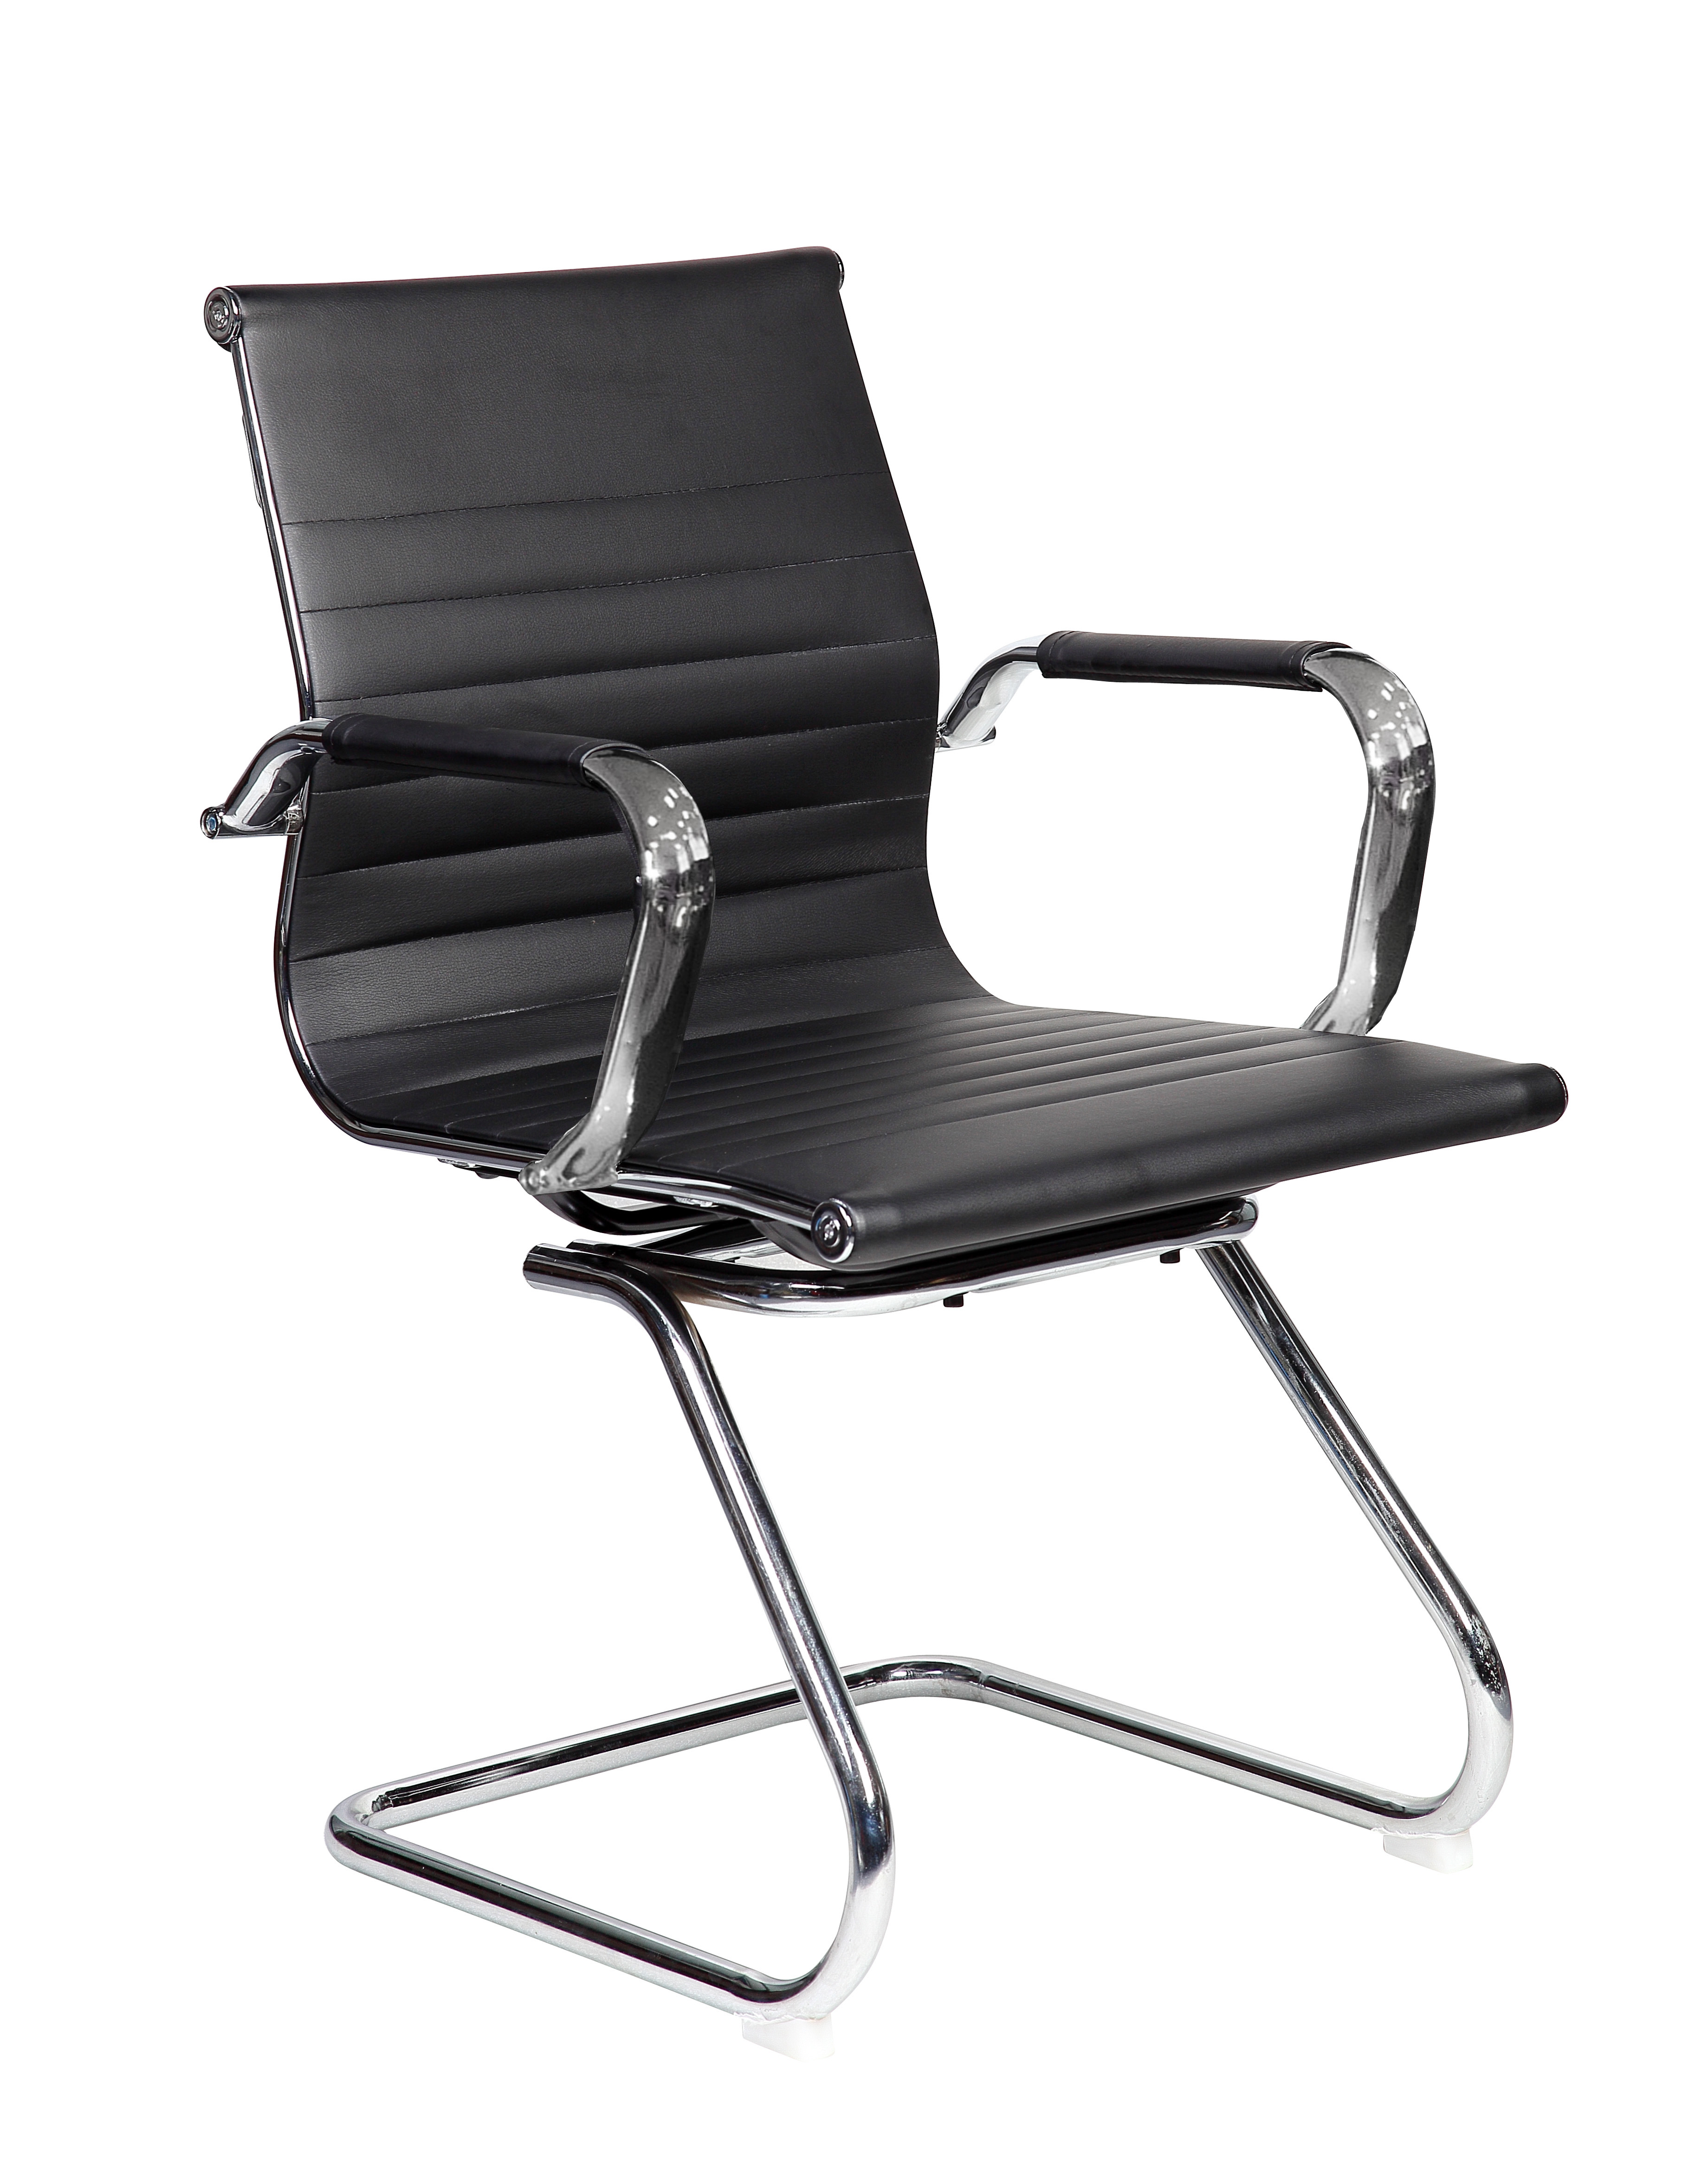 Techni Mobili Modern Visitor Office Chair, Black - image 2 of 8